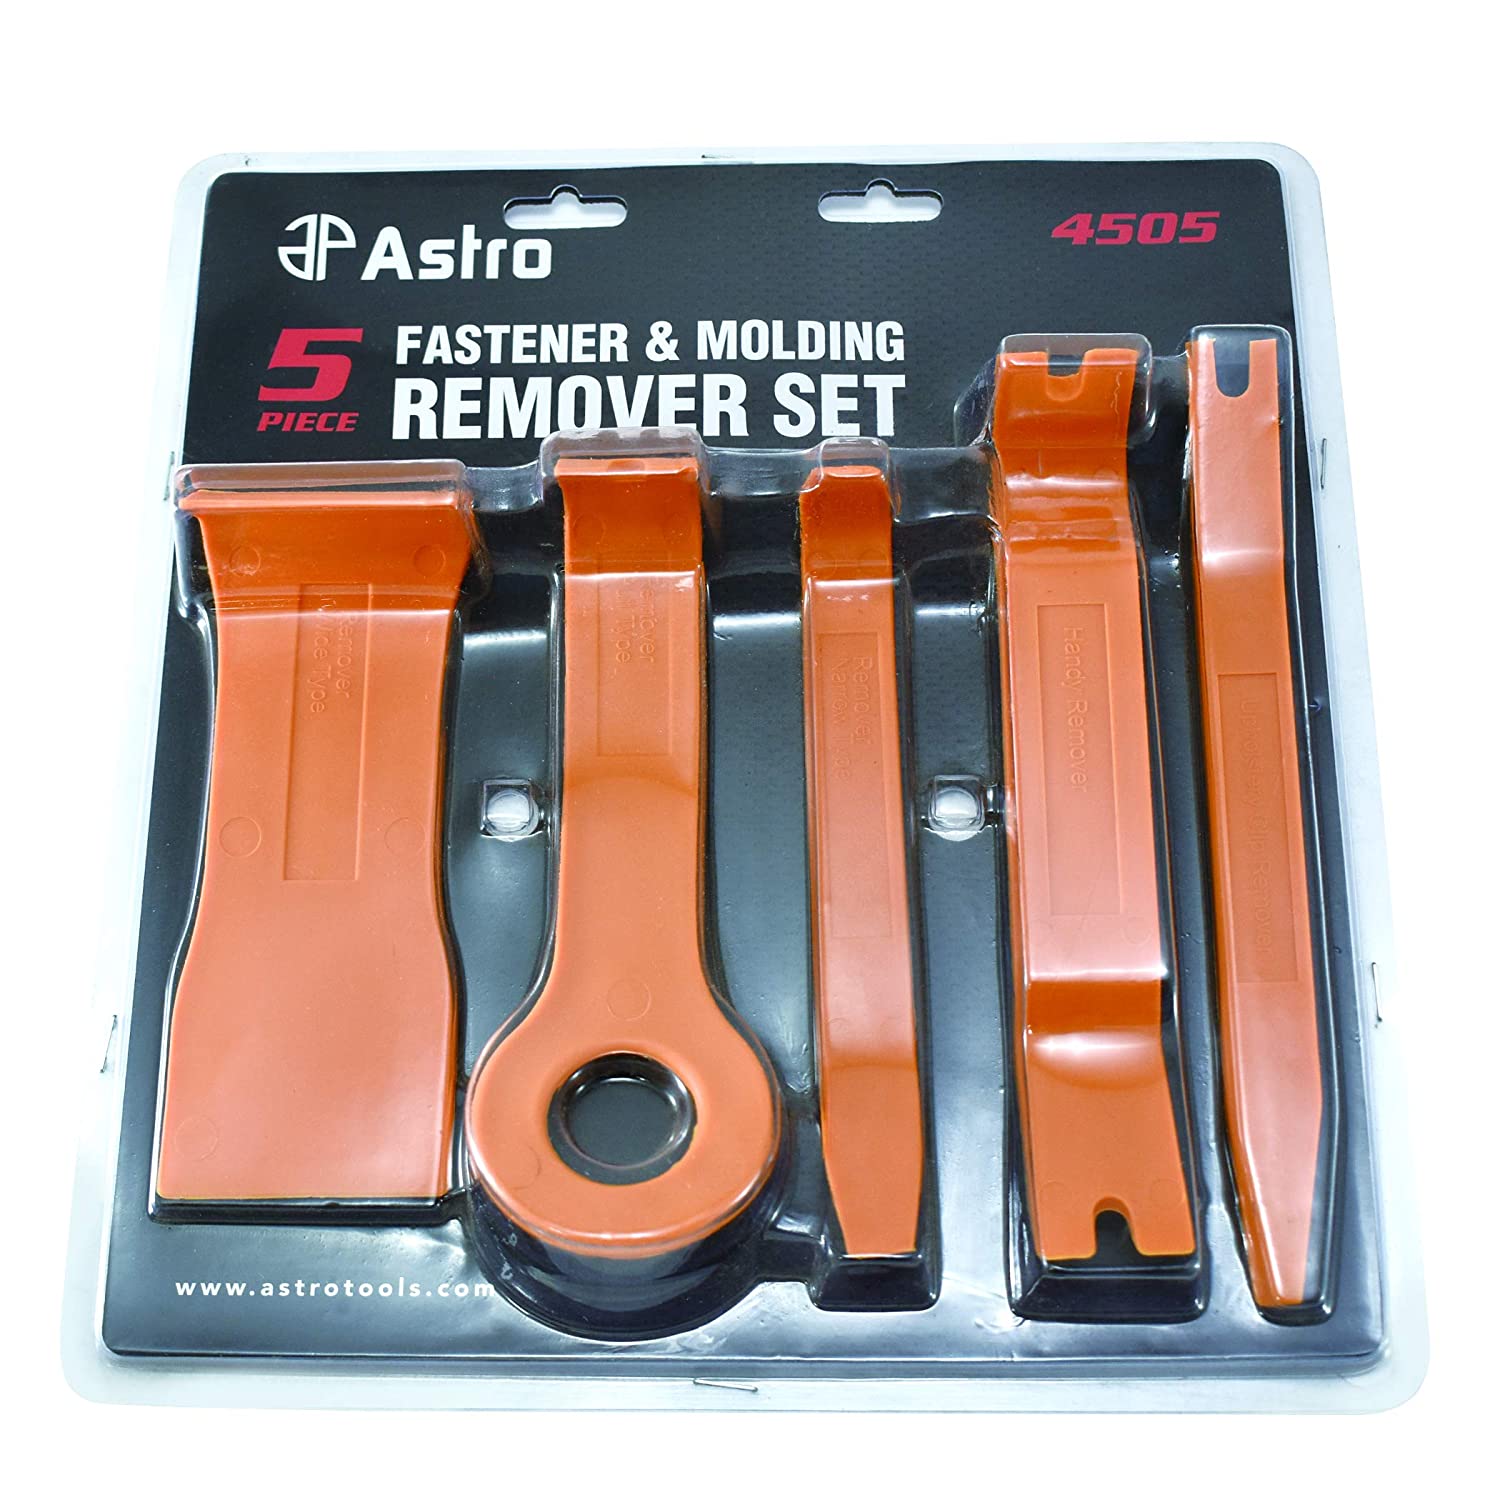 Astro Pneumatic 4505 5-Piece Fastener and Molding Remover Set - MPR Tools & Equipment